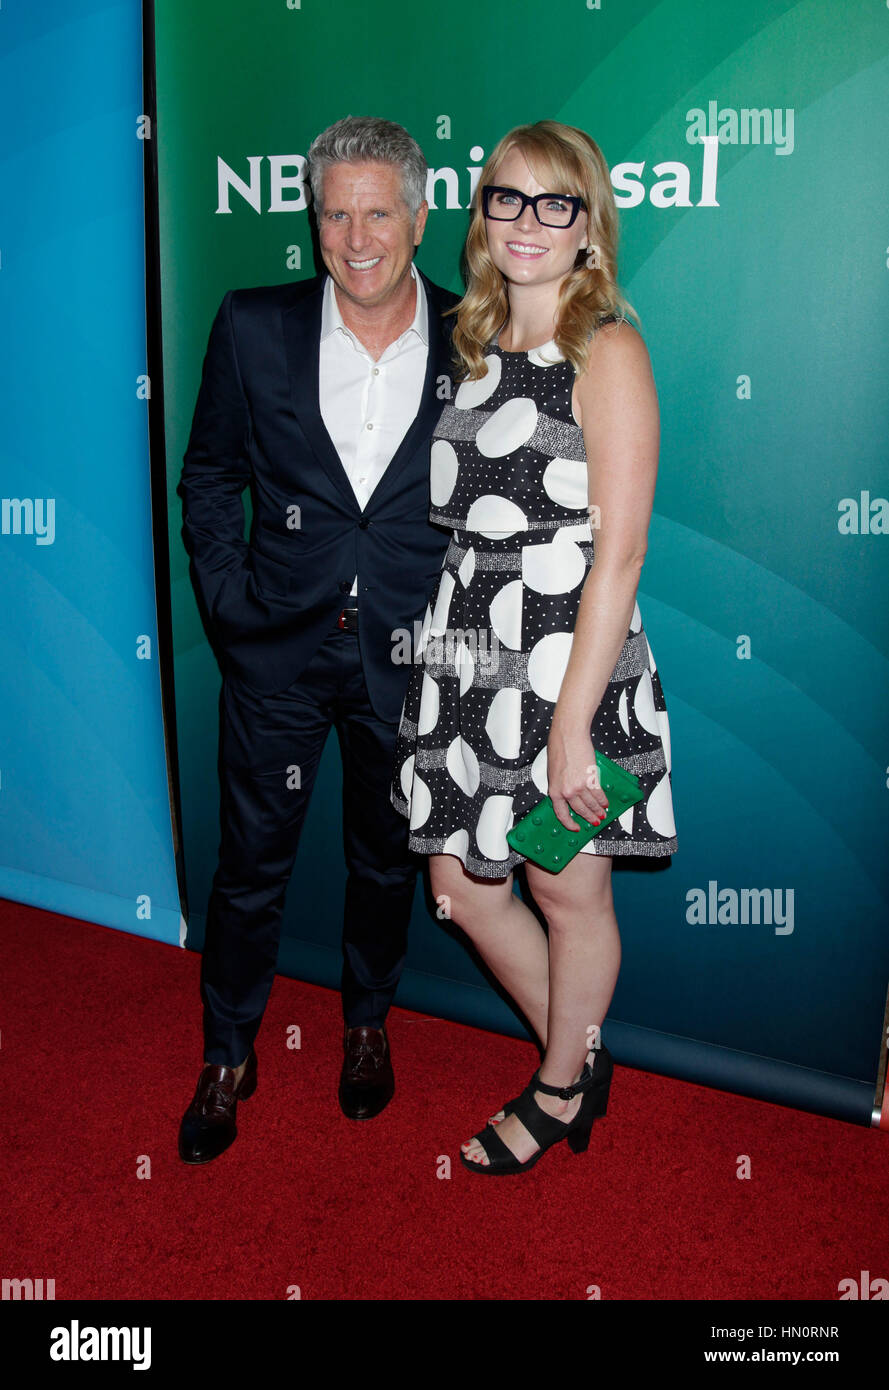 Donny Deutsch and Emily Tarver arrives at the NBCUniversal Press Tour at the 2015 TCAs on August 12, 2015 in Beverly Hills, California. Photo by Francis Specker Stock Photo